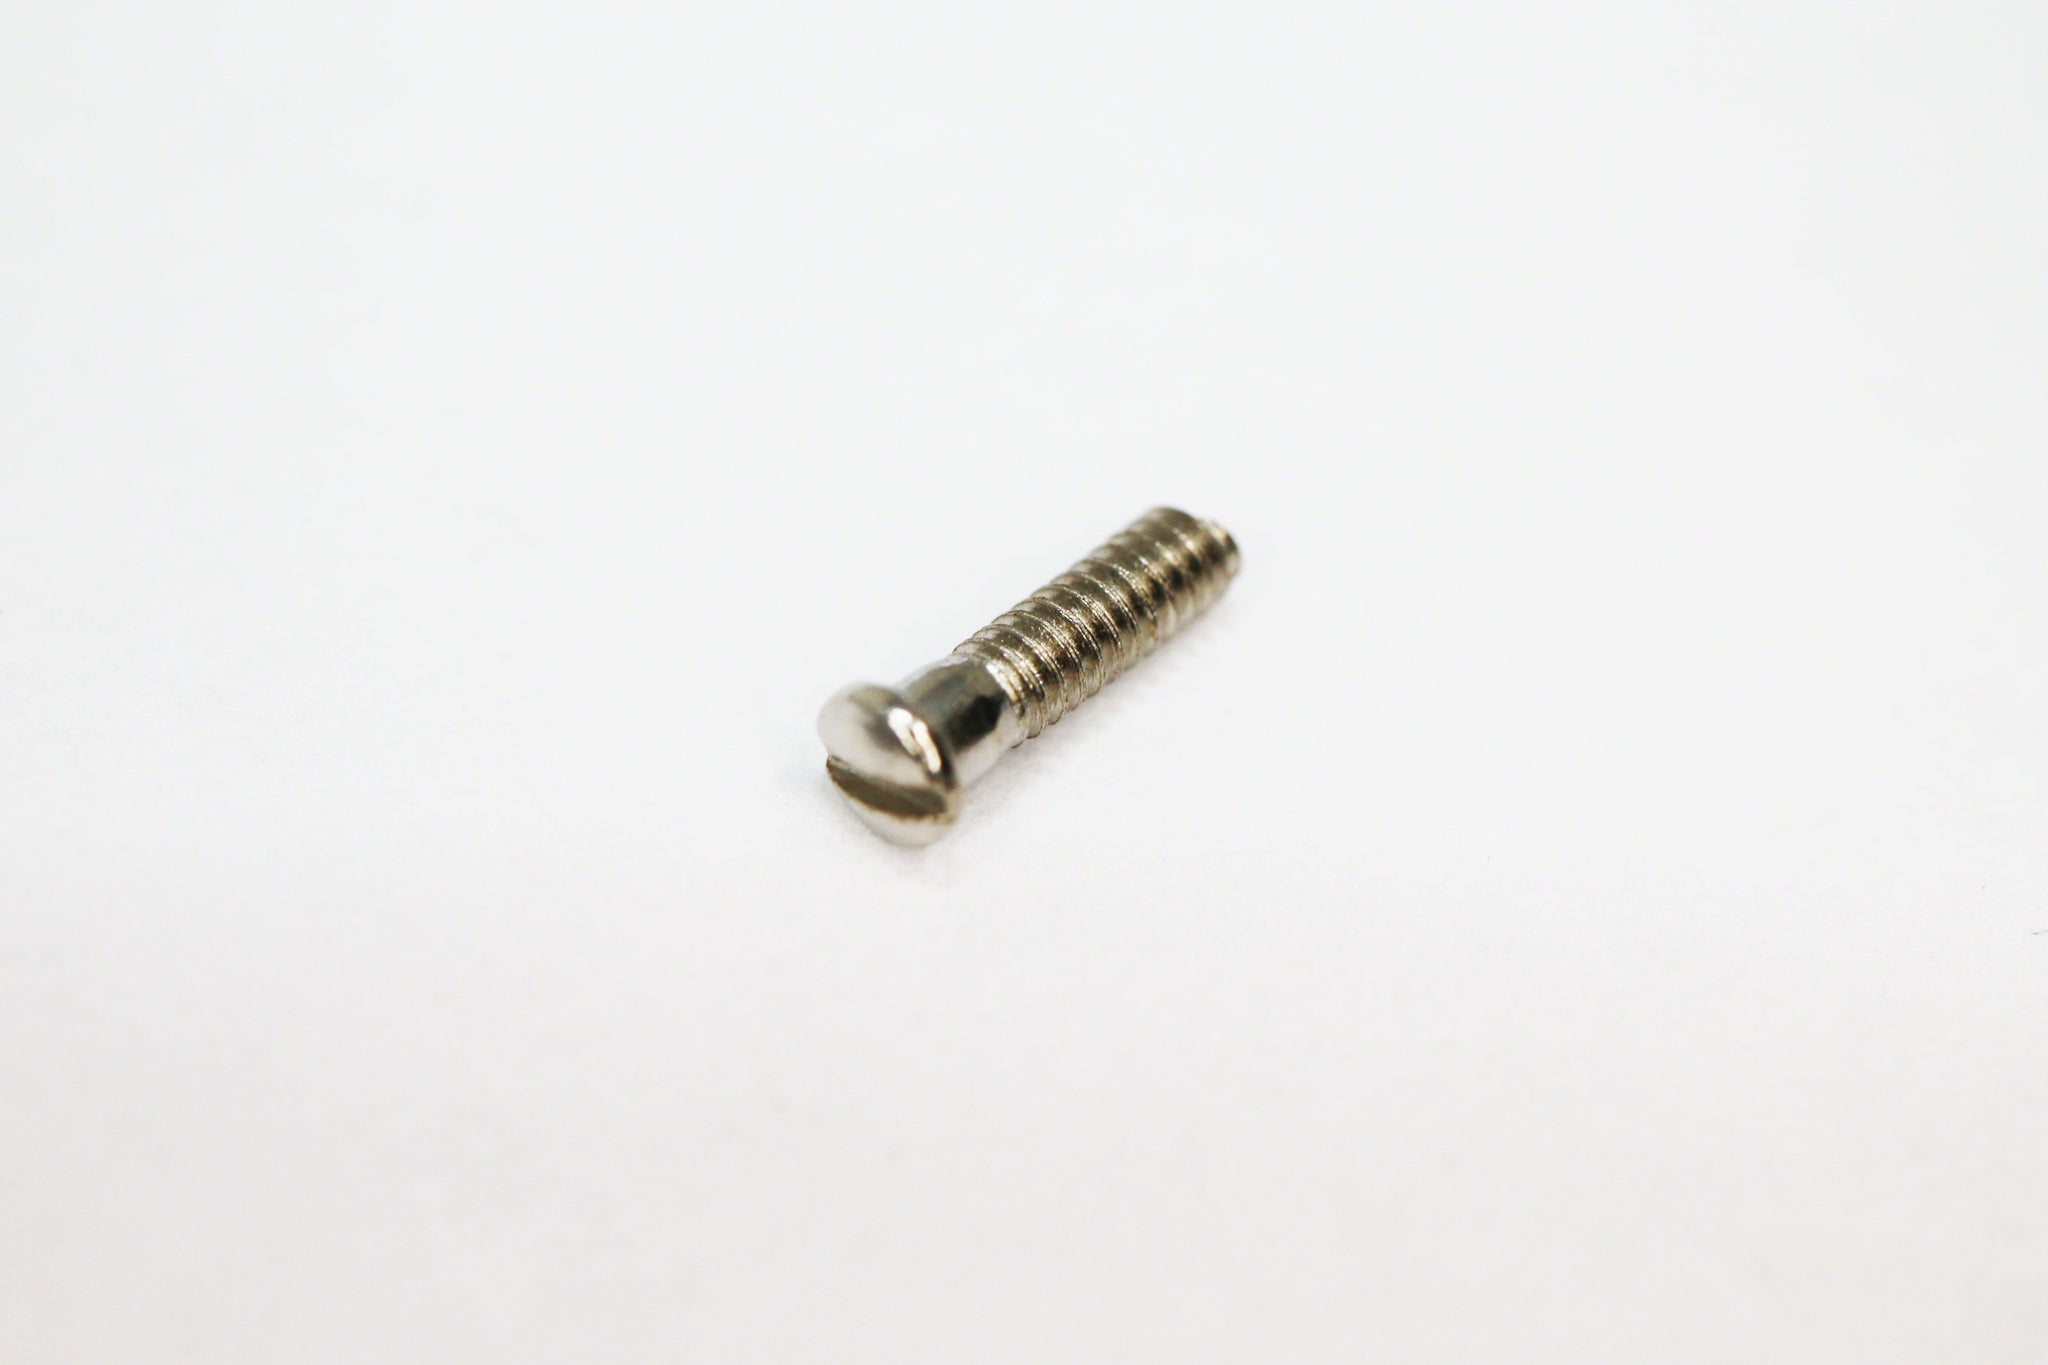 Ray Ban 4226 Screws | Replacement Screws For RB 4226 